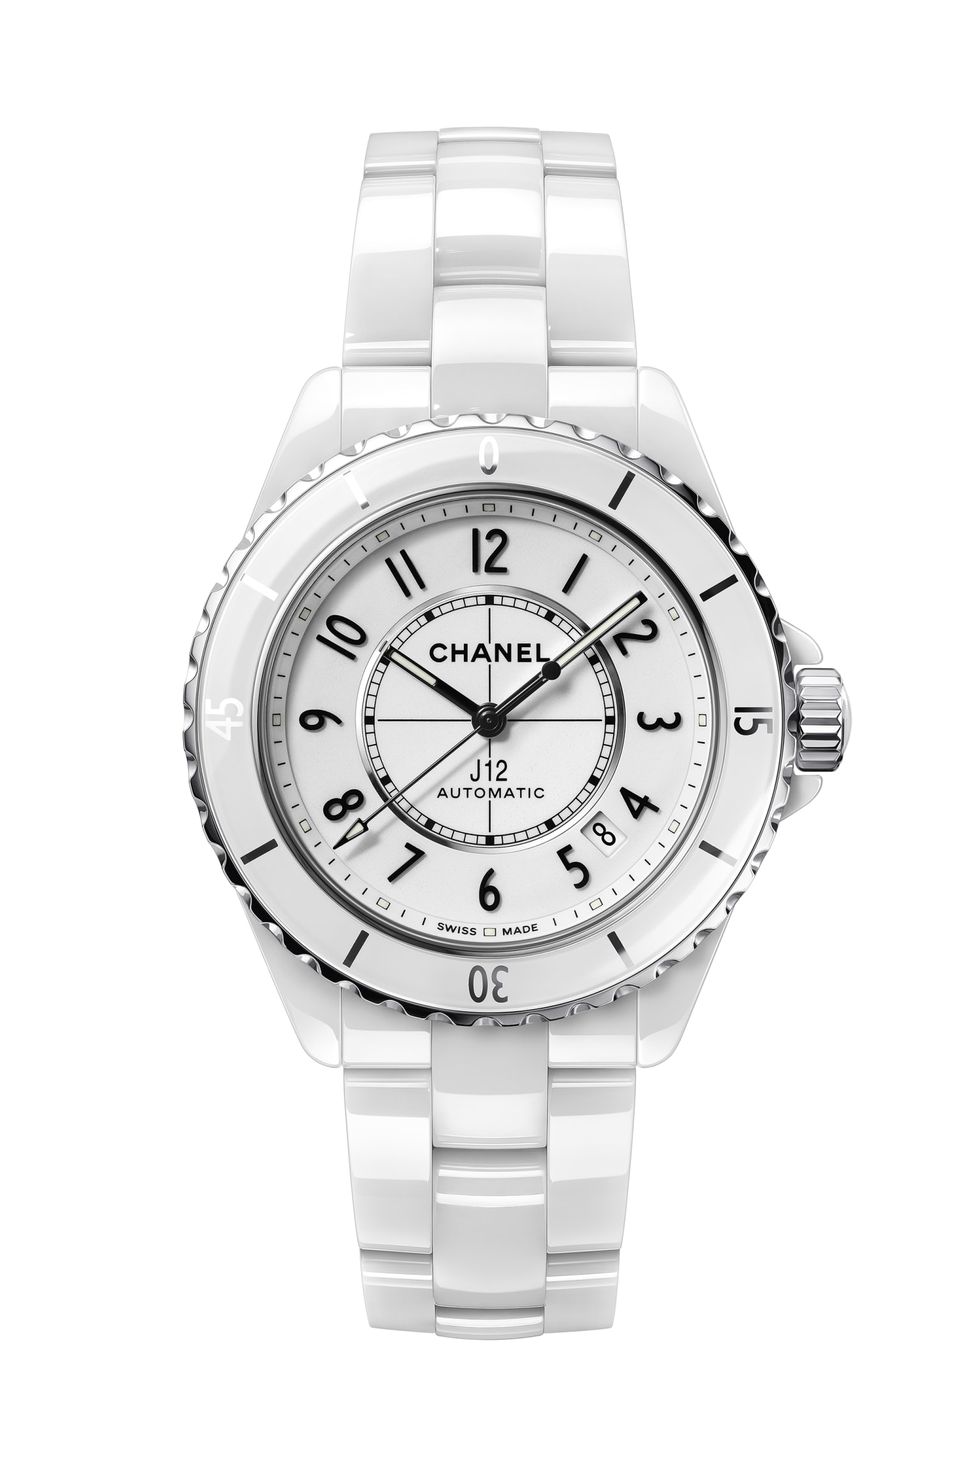 Chanel j12 paradoxe watch #Chanel #Watches